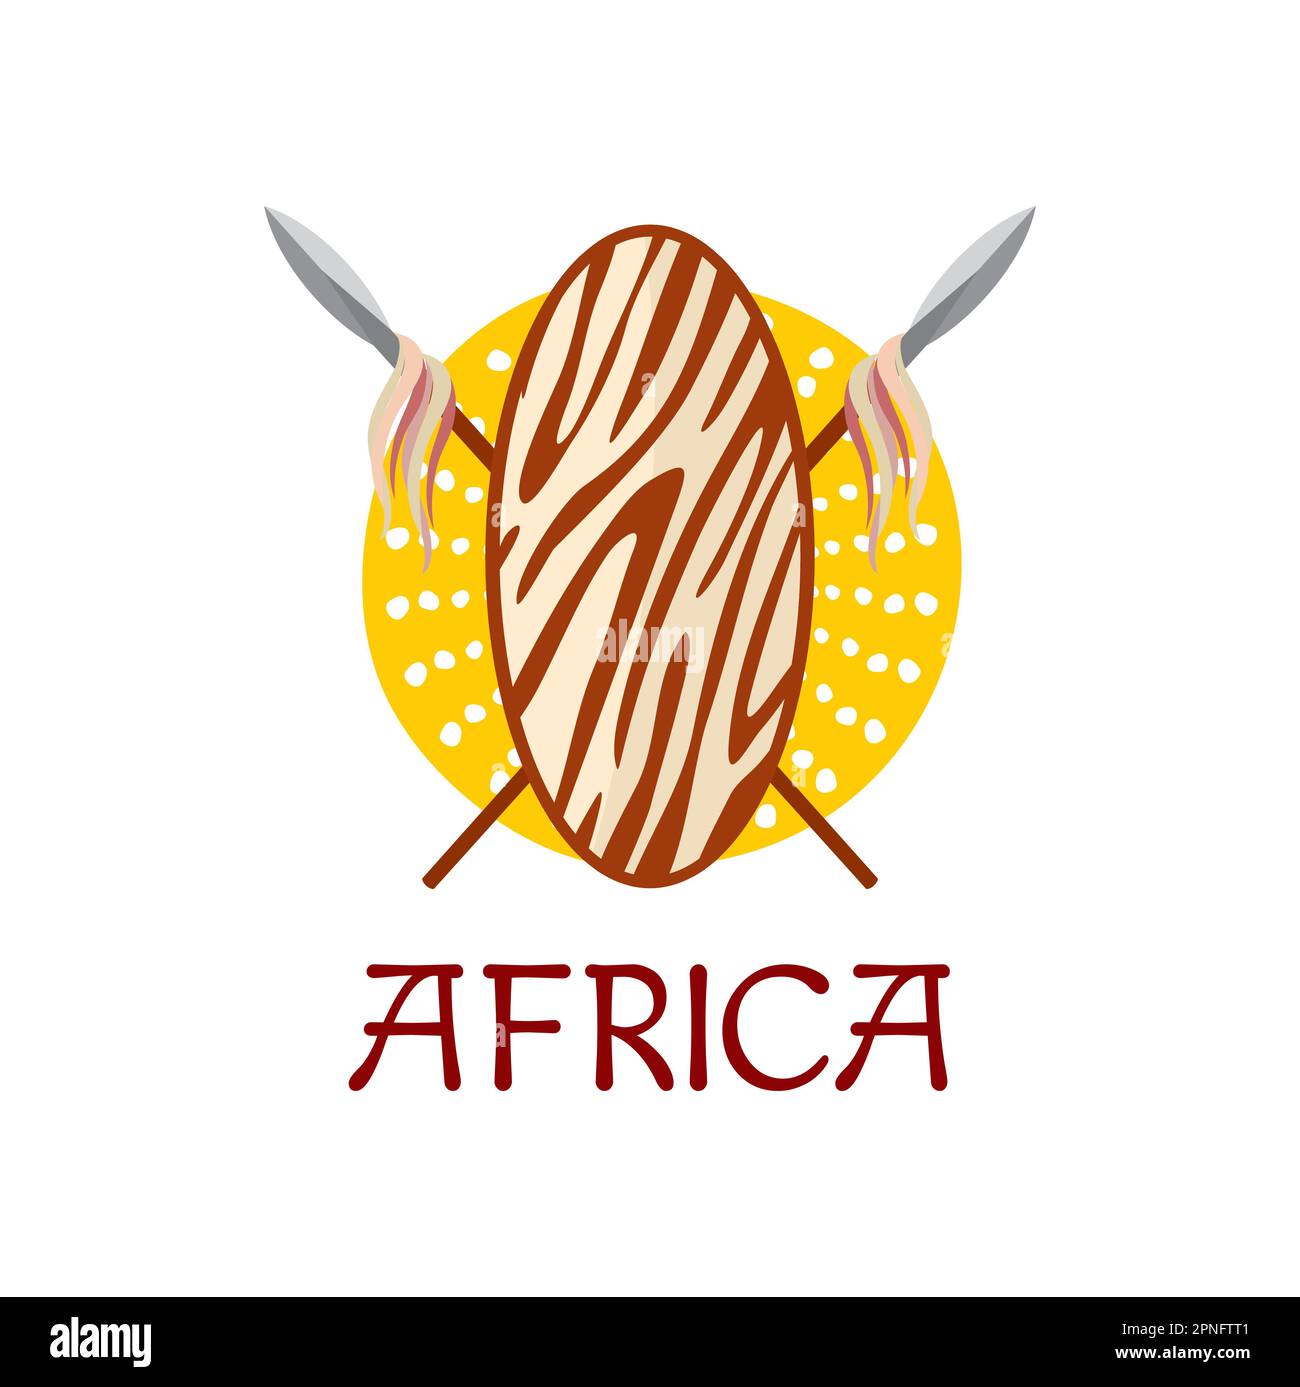 Africa icon. Tribe shield and crossed spears. Tanzania travel, Africa tribe or Nigeria national culture vector icon, Kenya ethnic symbol or sign with Stock Vector